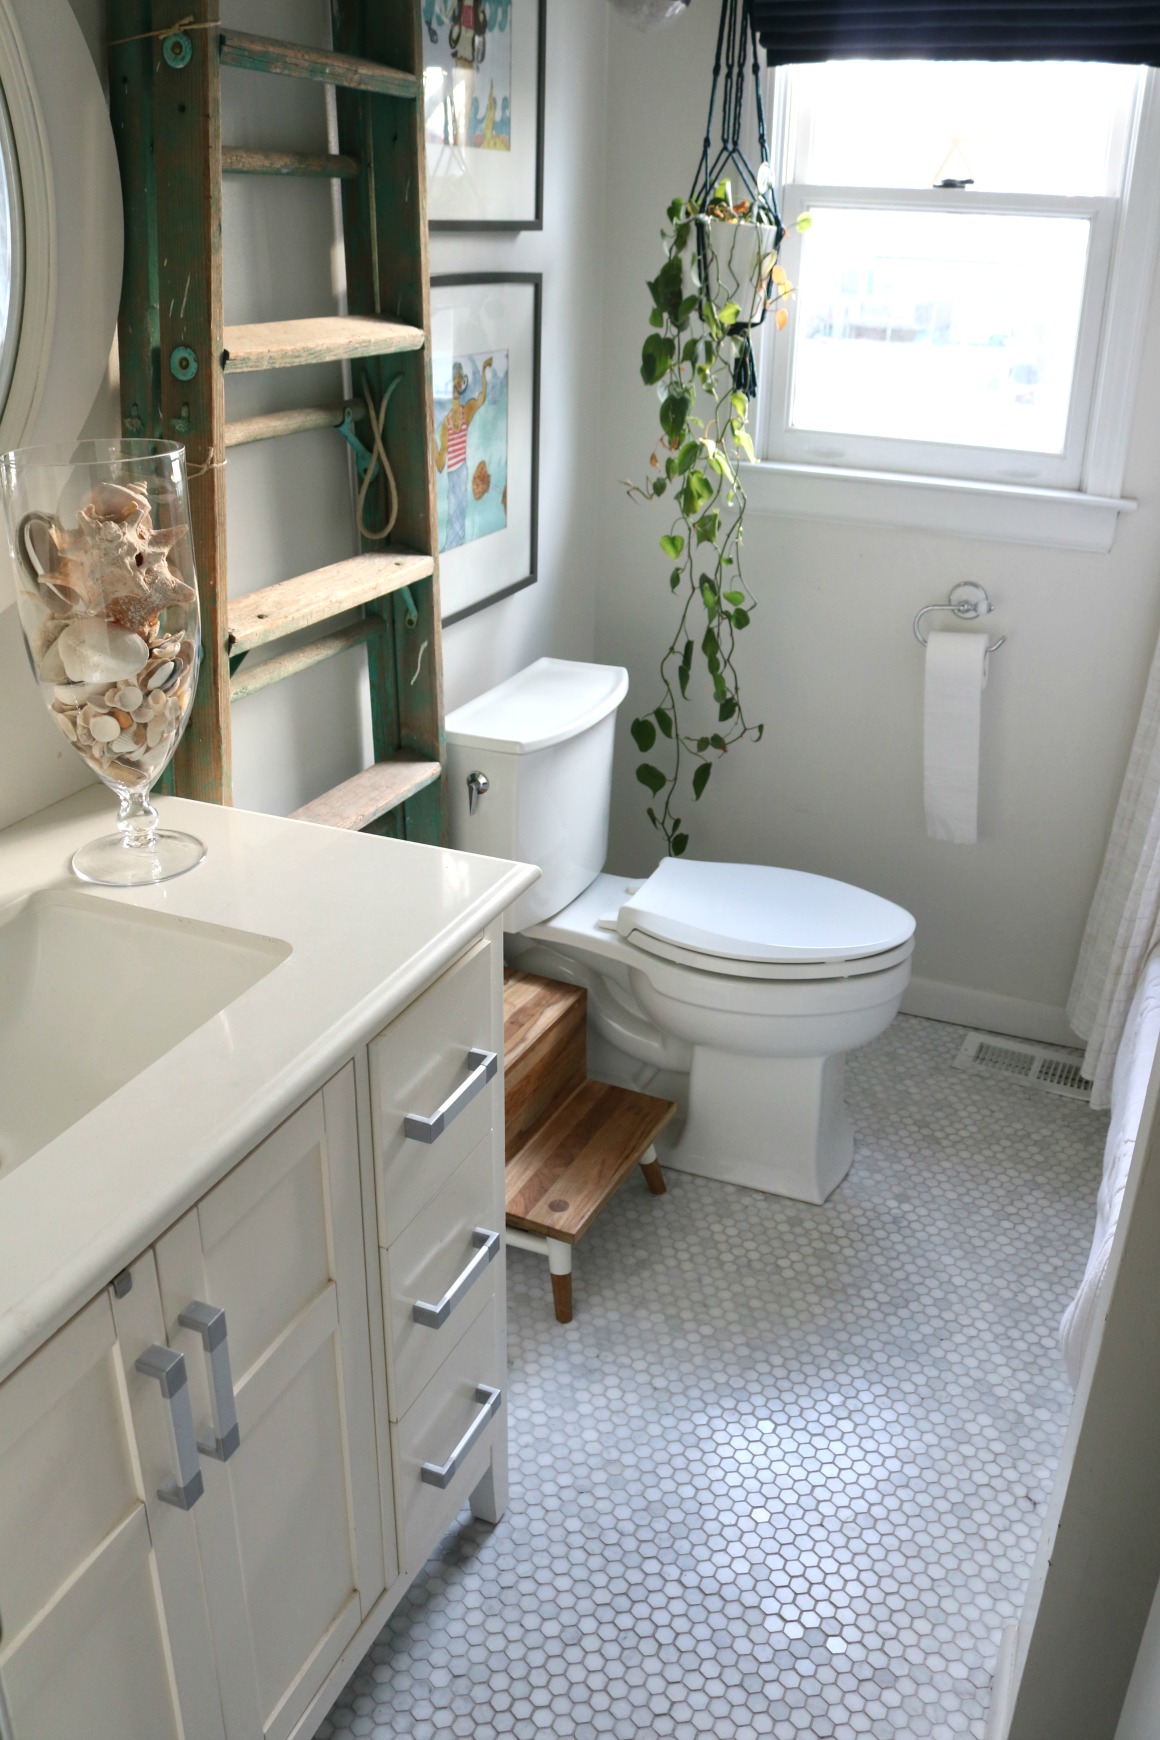 White and Gold Bathroom Design Plan- Eclectic Bathroom Design Plan